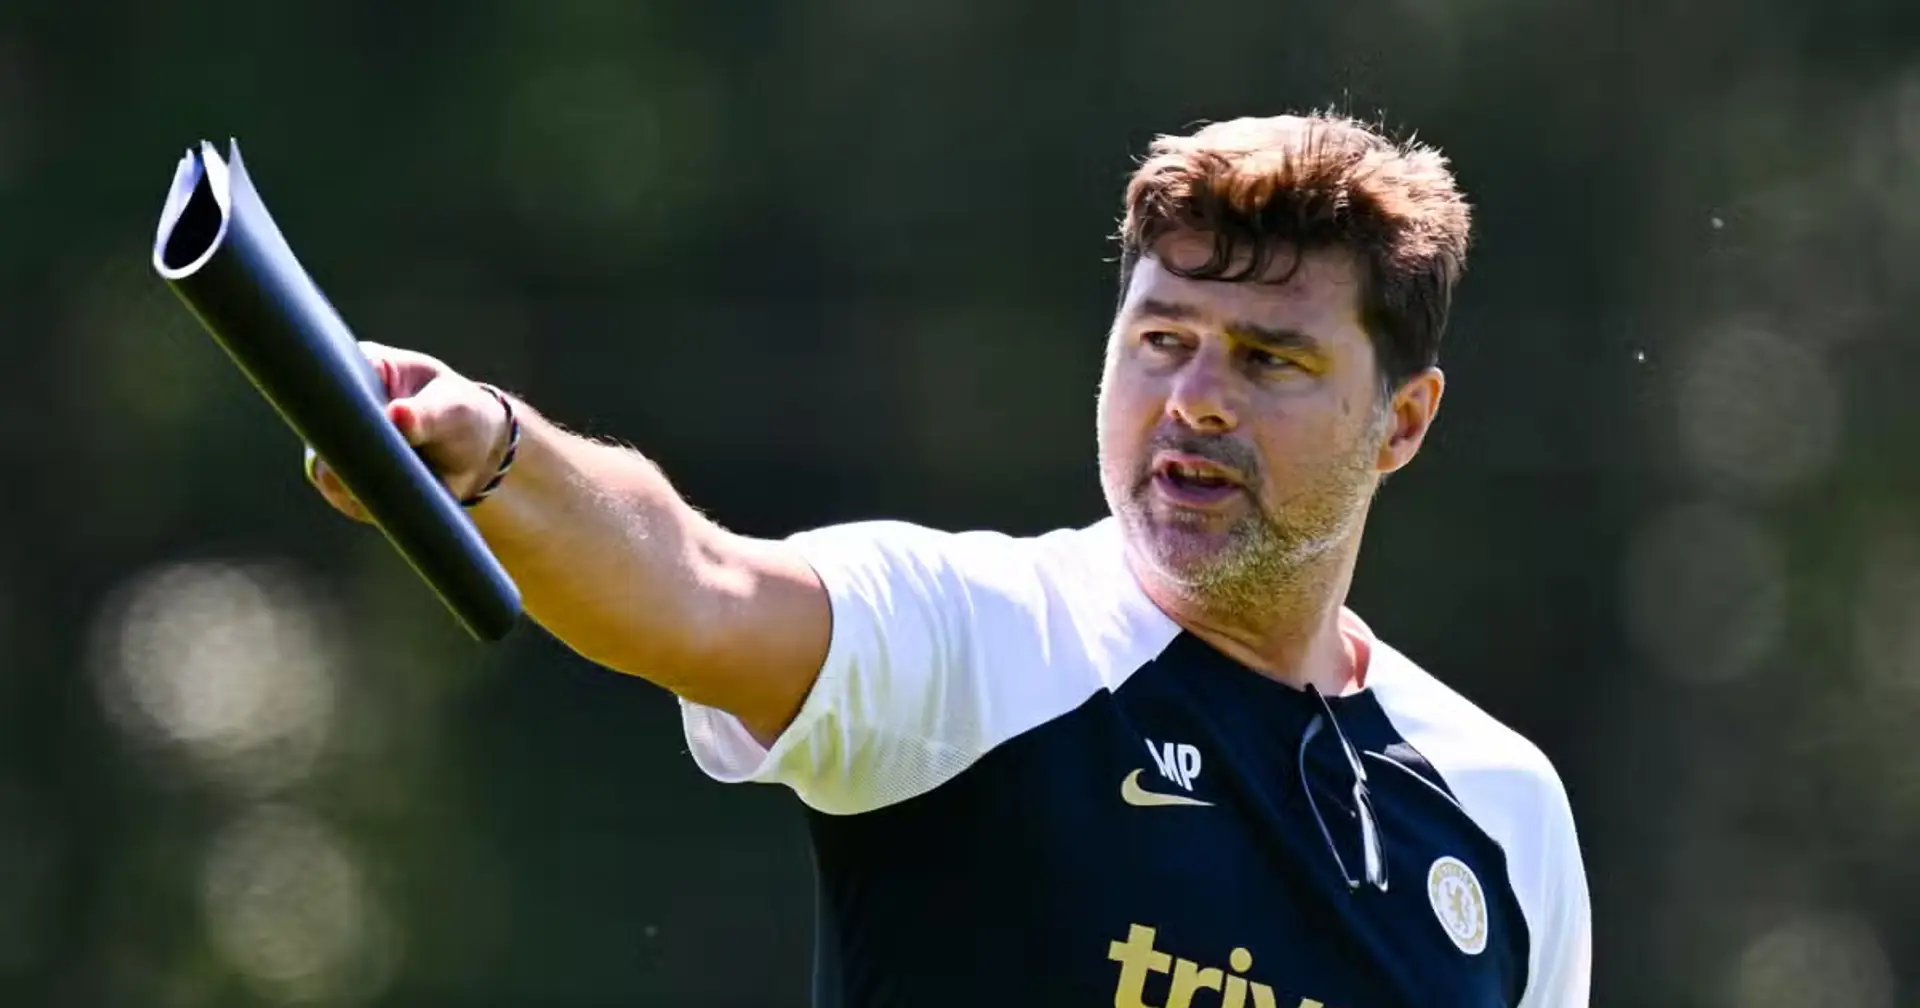 Poch hints at playing with a false nine & 2 more under-radar stories at Chelsea